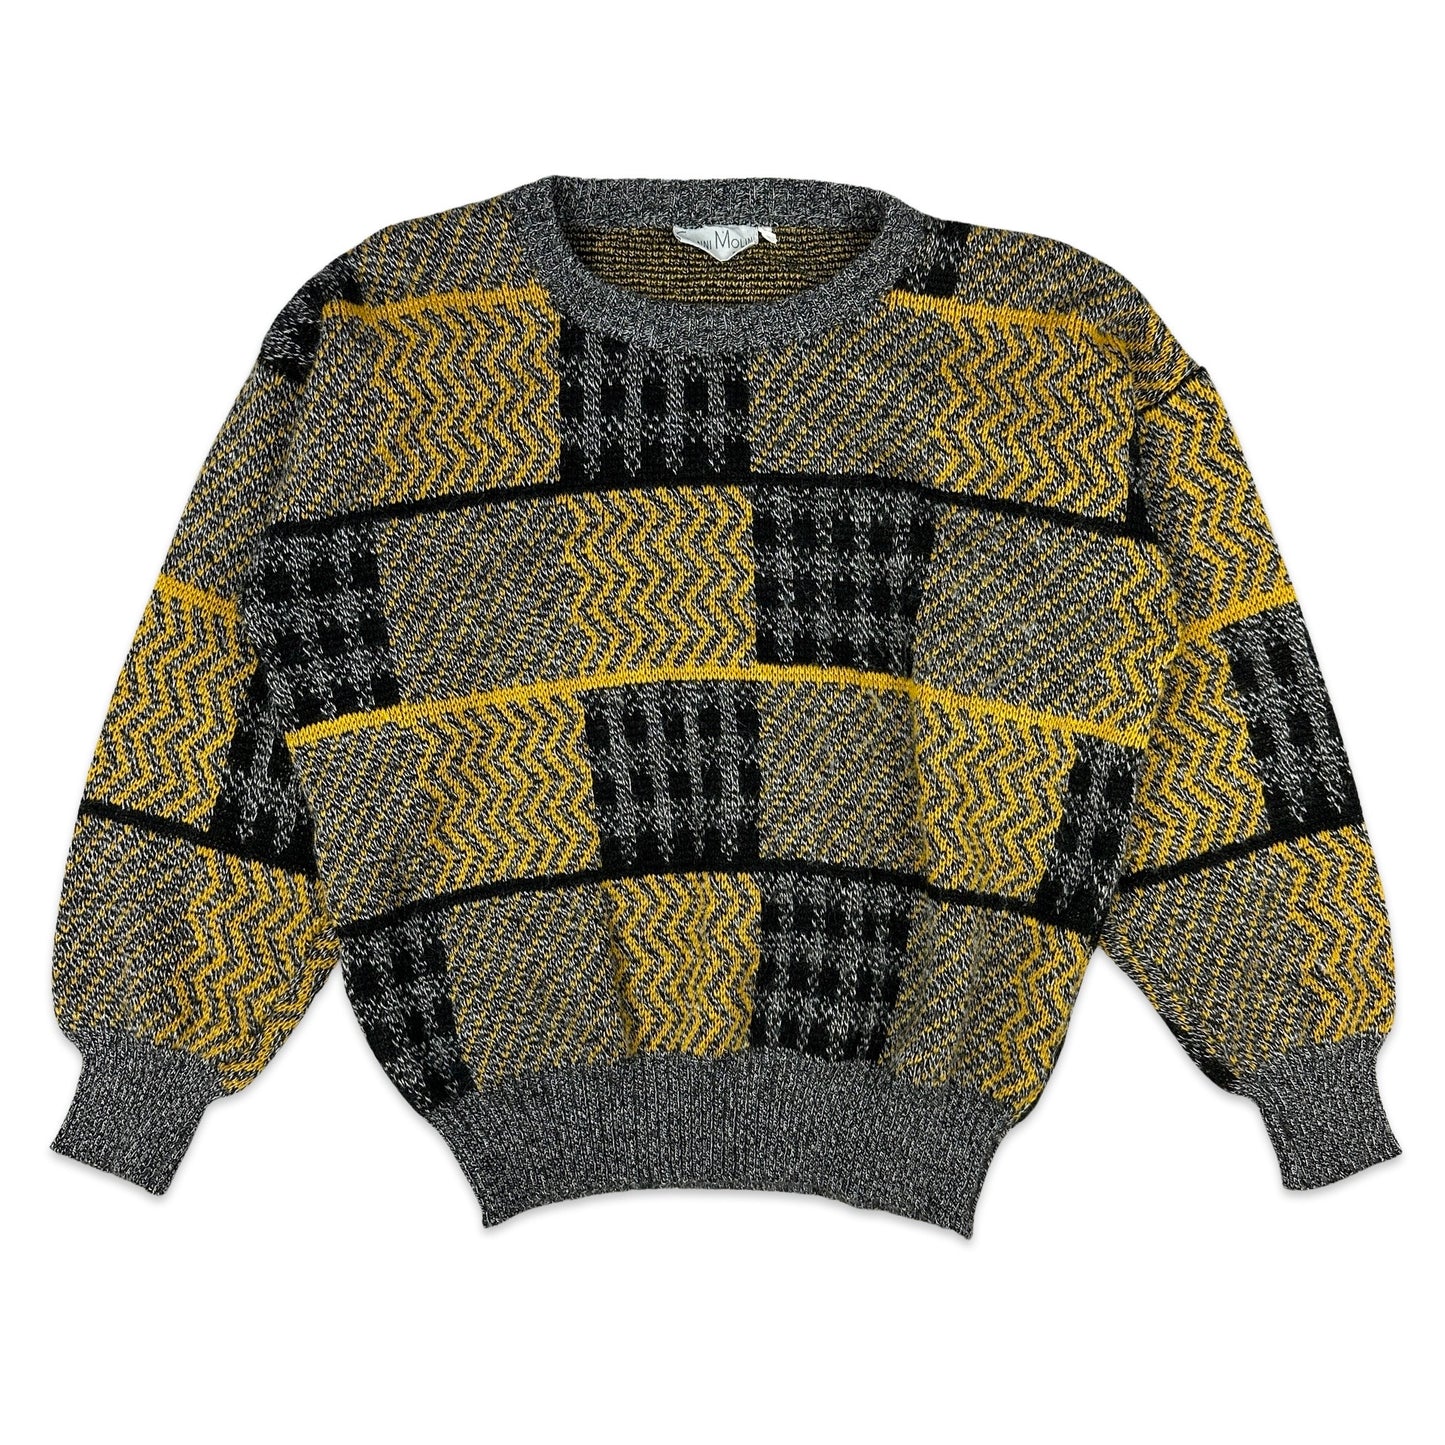 Vintage 80s Grey & Yellow Patterned Knit Jumper 12